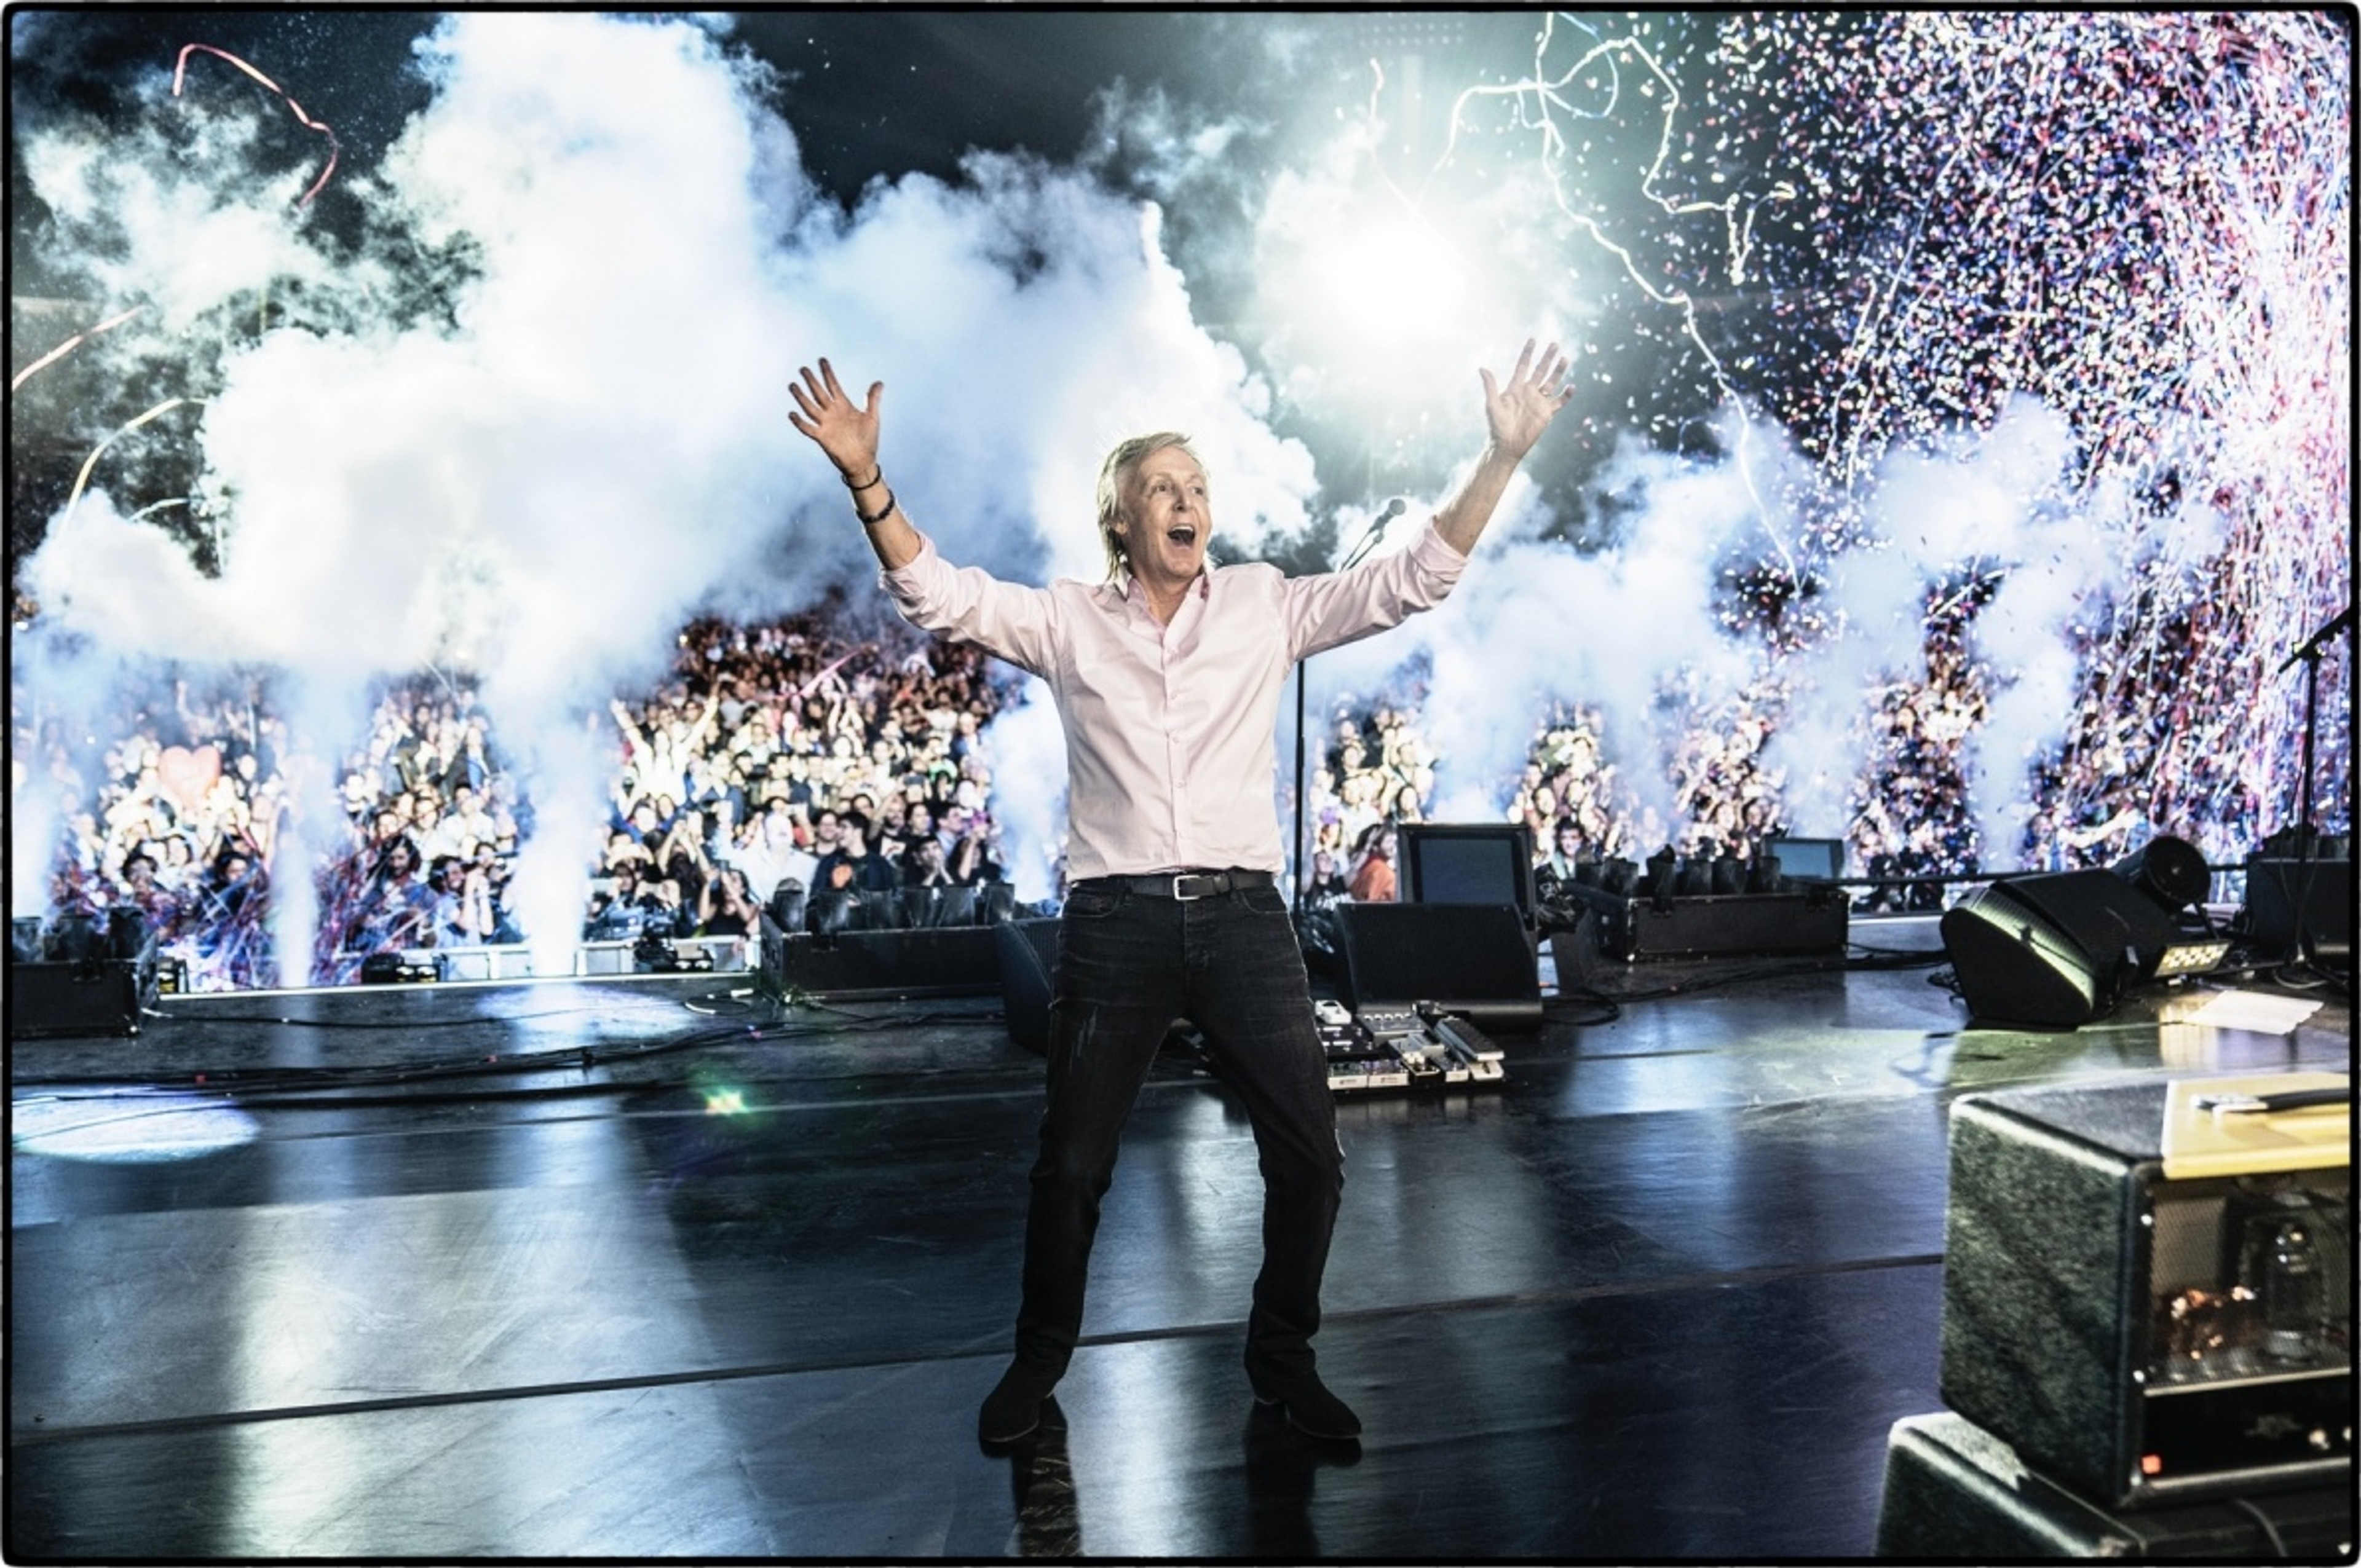 Paul celebrating at the end of first 2019 Freshen Up Tour show.